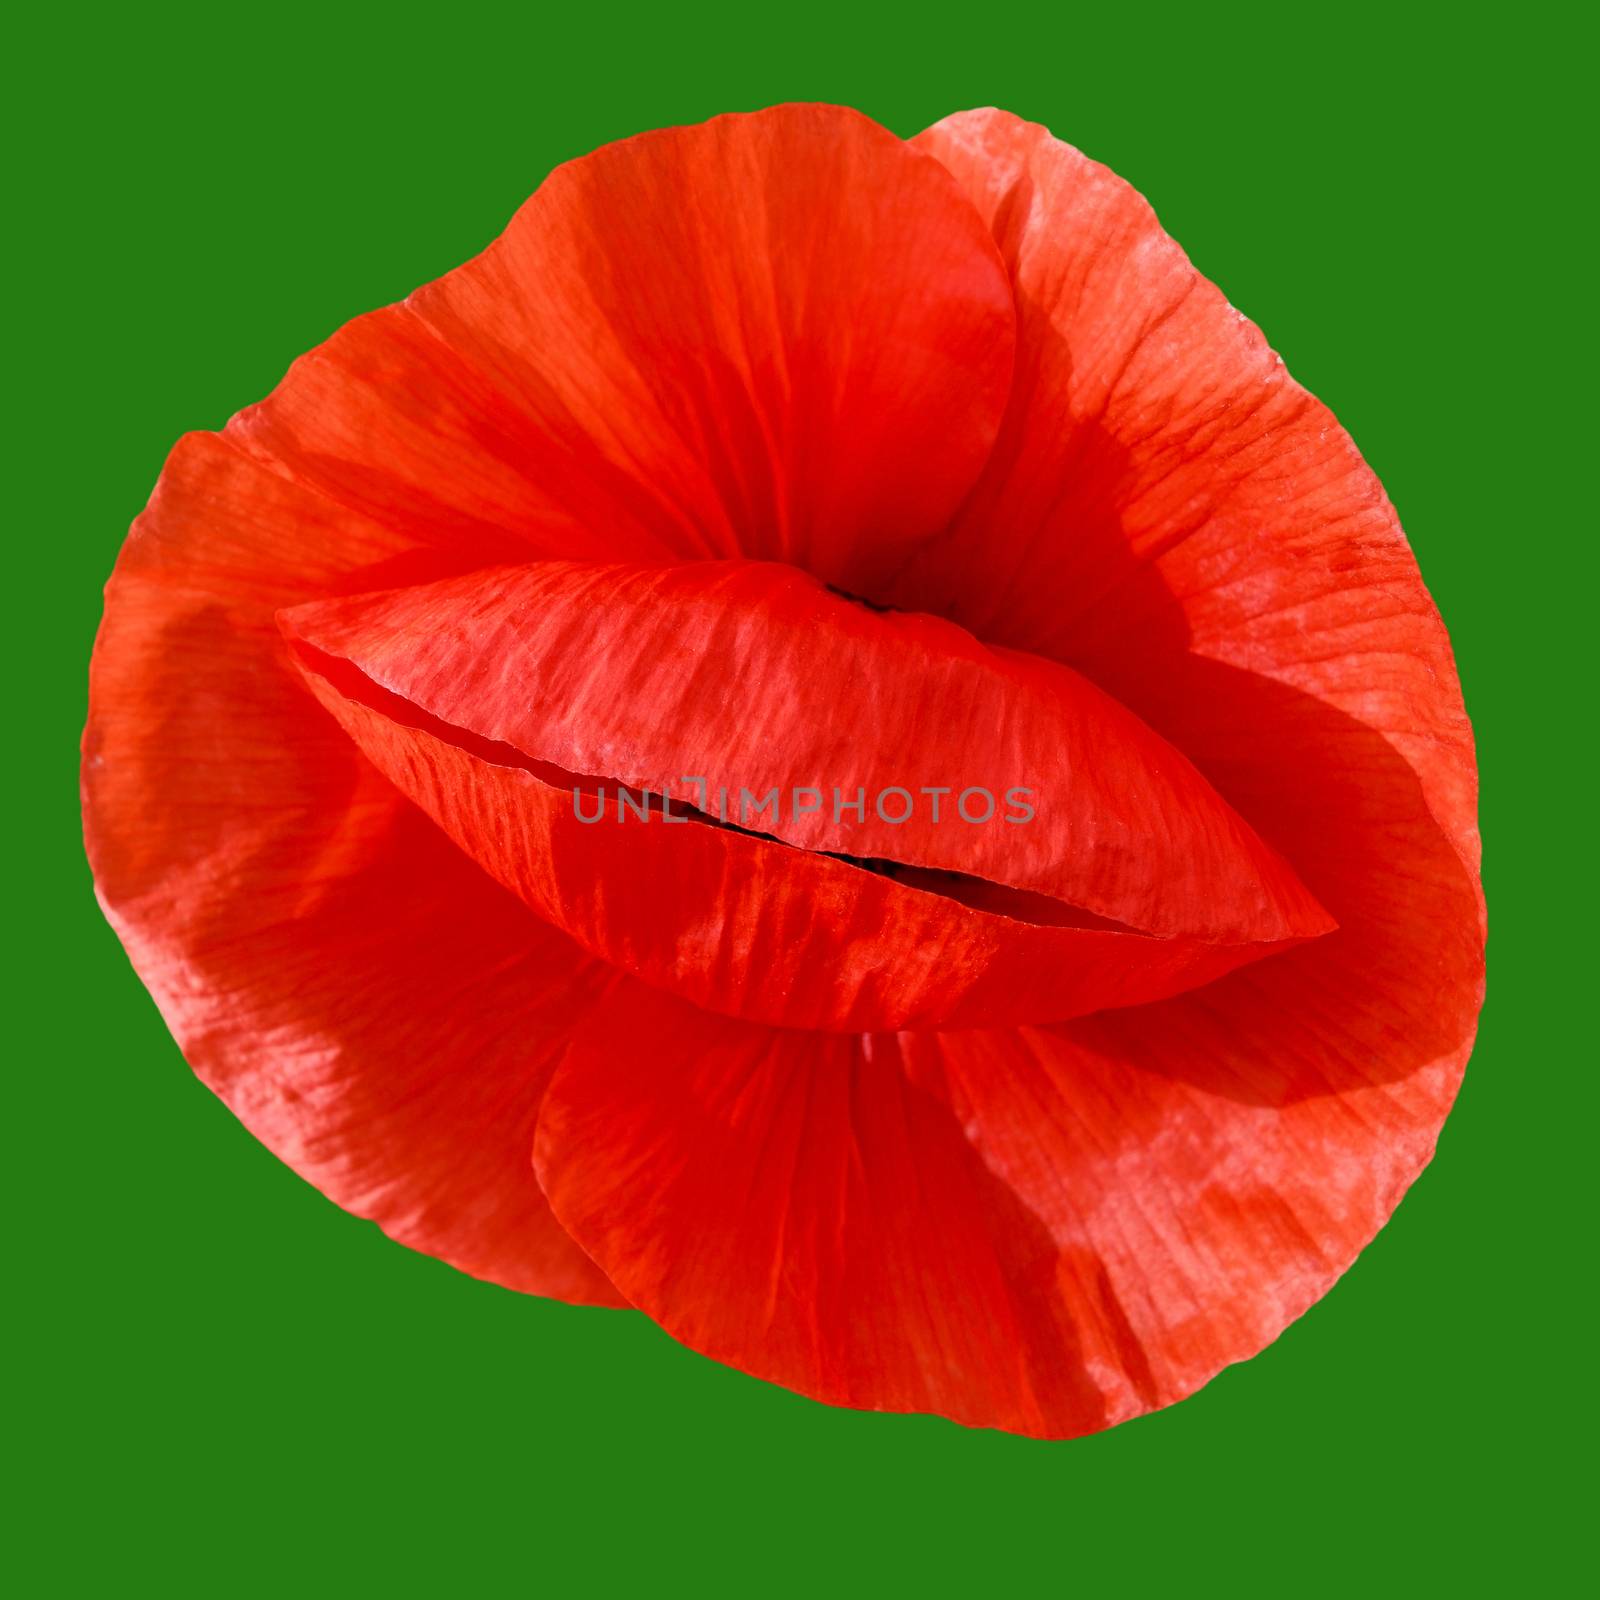 Red poppy on a green background by fogen